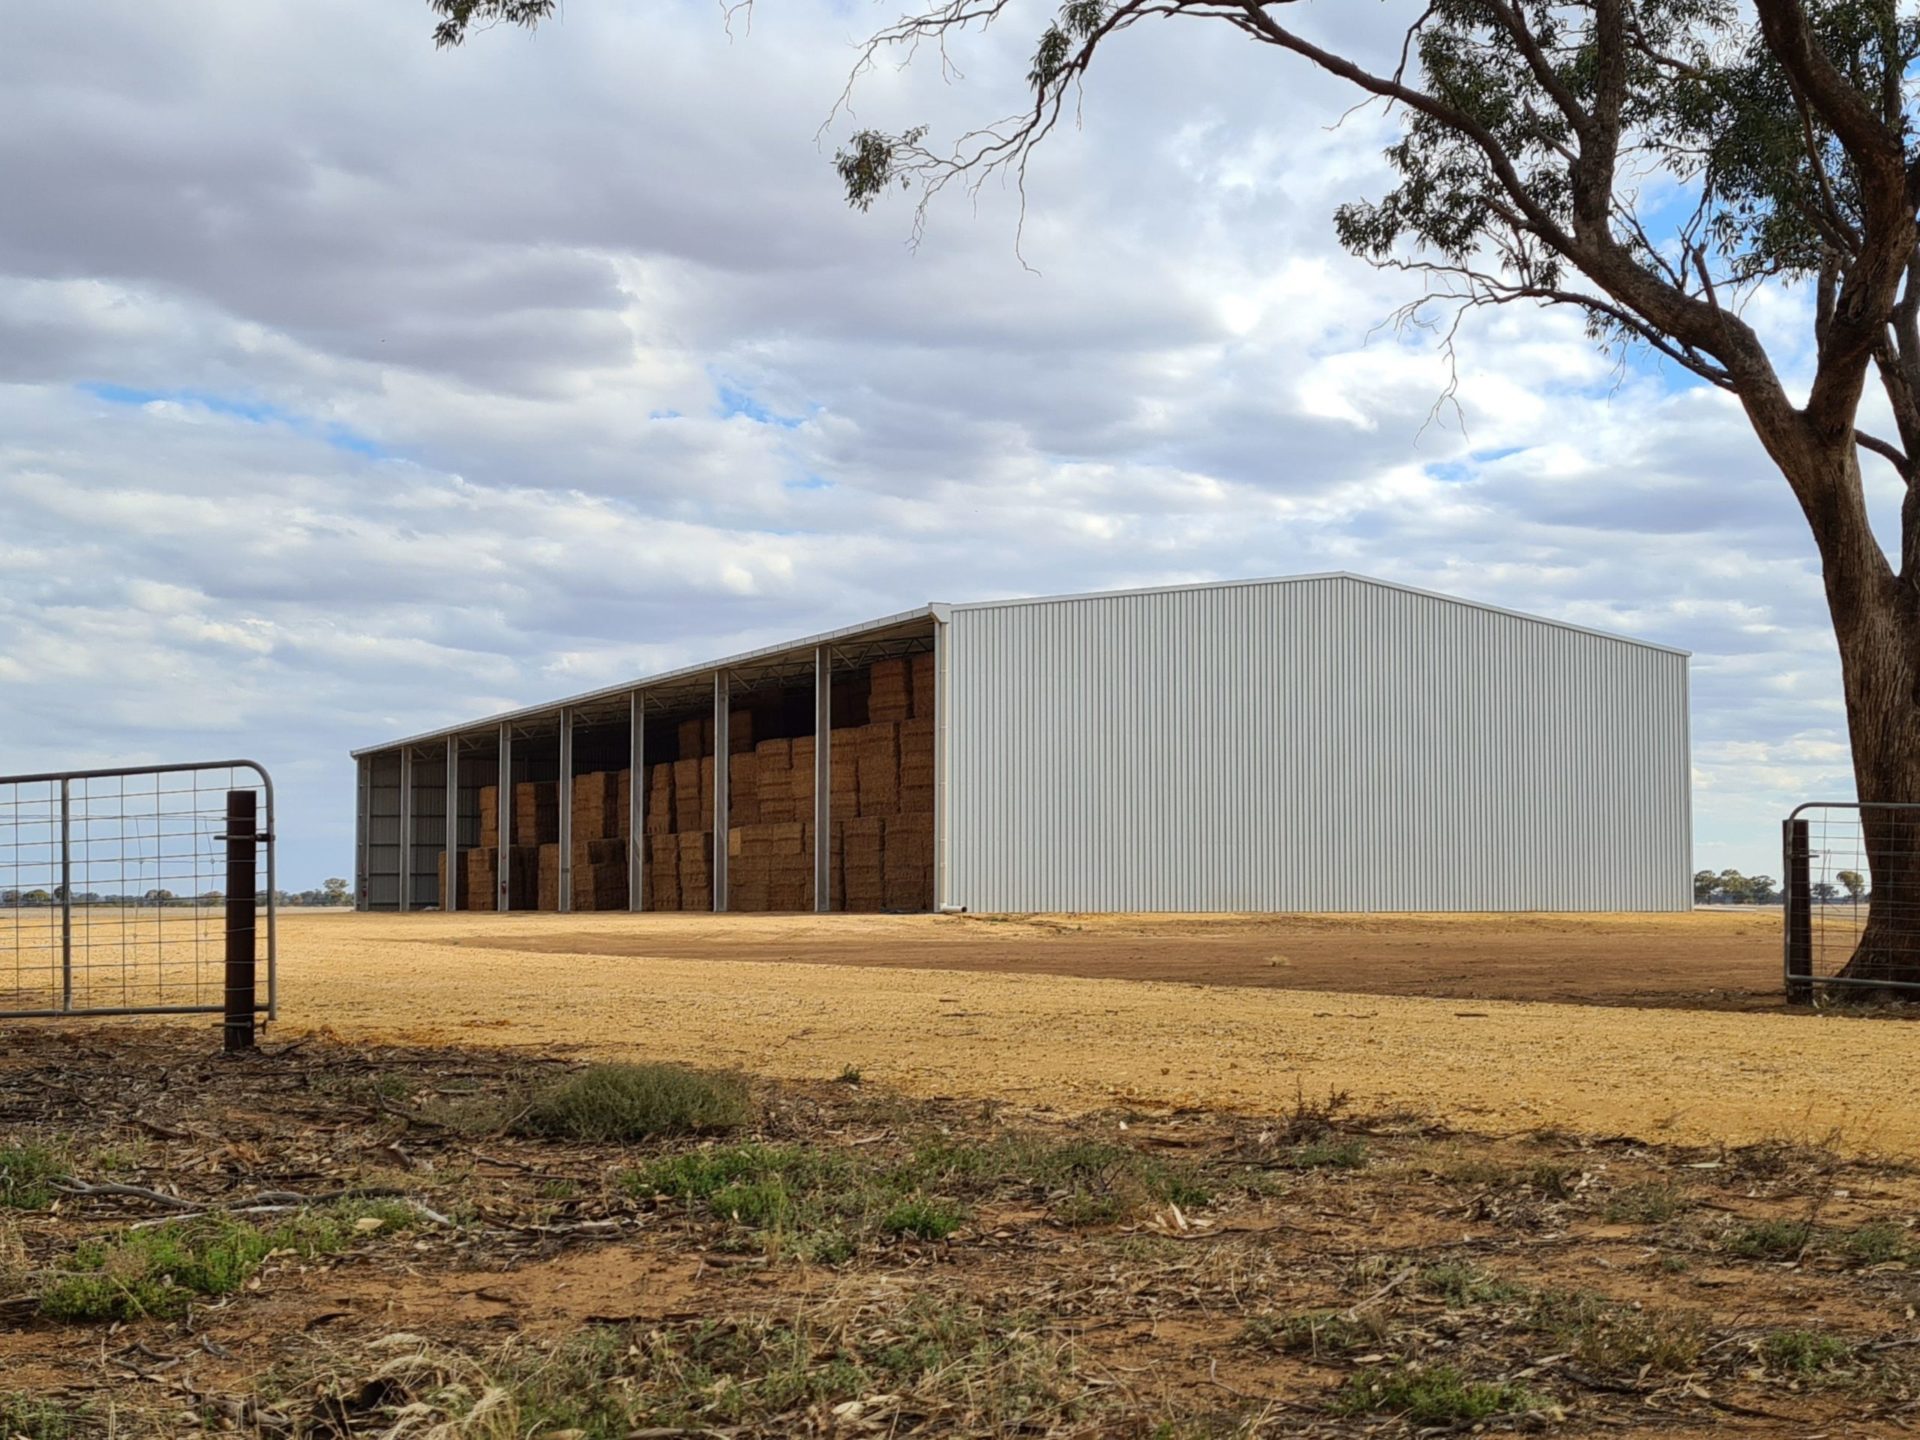 You are currently viewing A 64m x 24m x 7.5m open-front hay shed